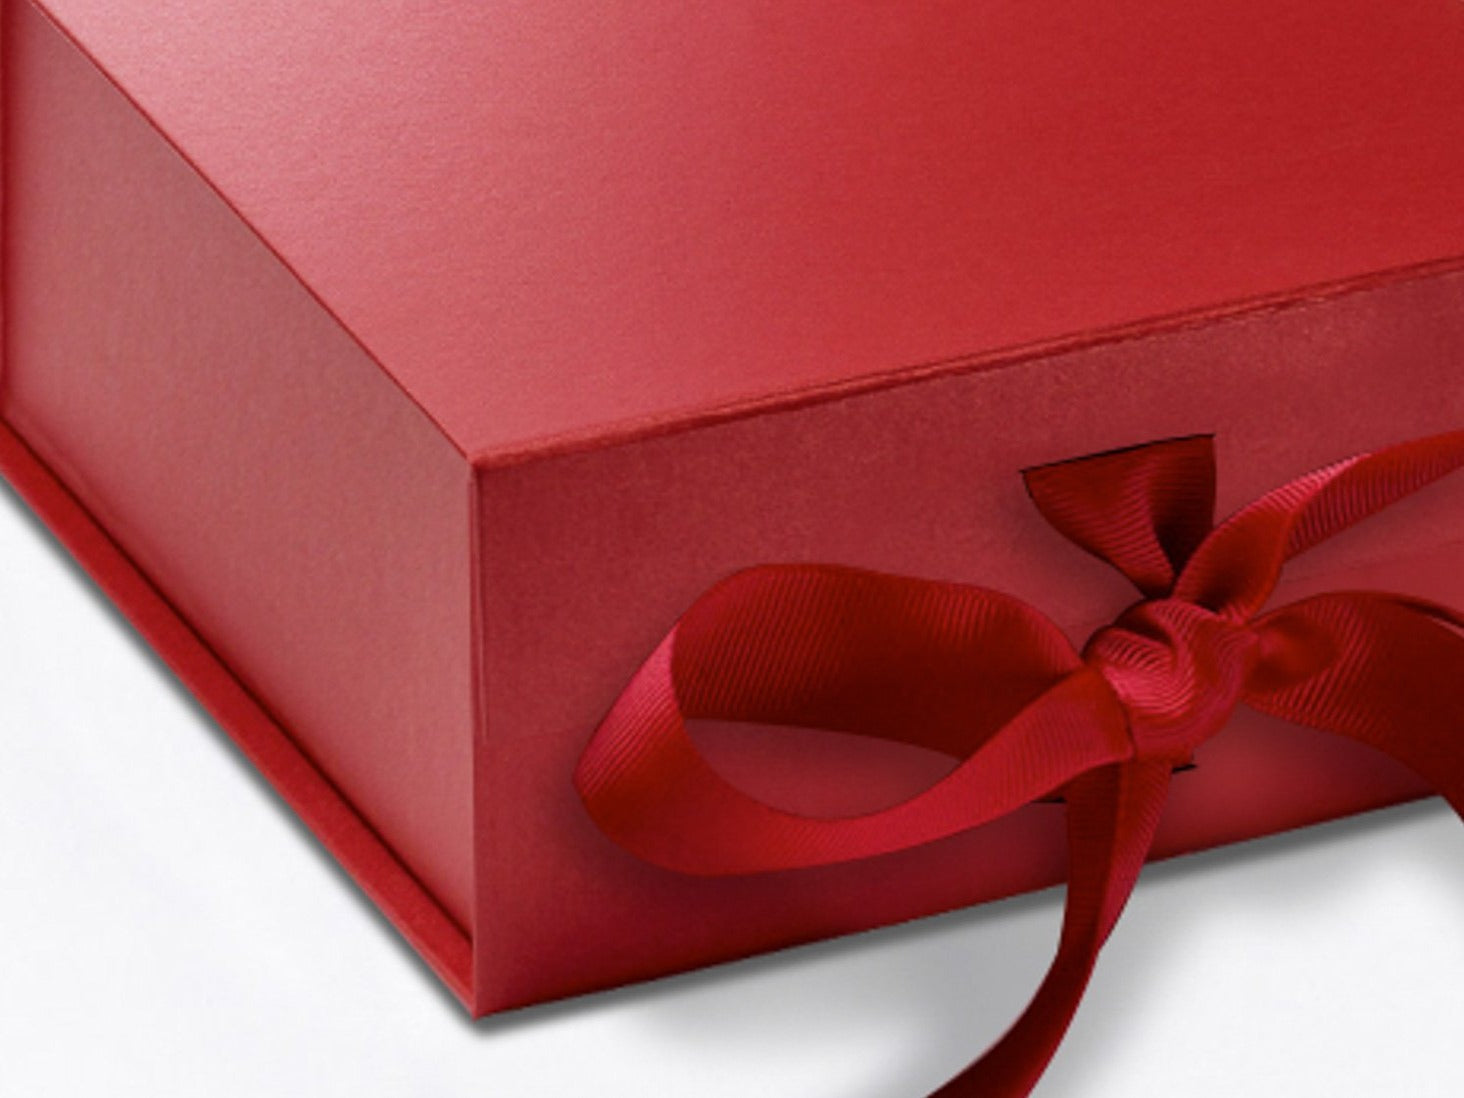 Sample Red Luxury Gift Box for Jewelry Packaging